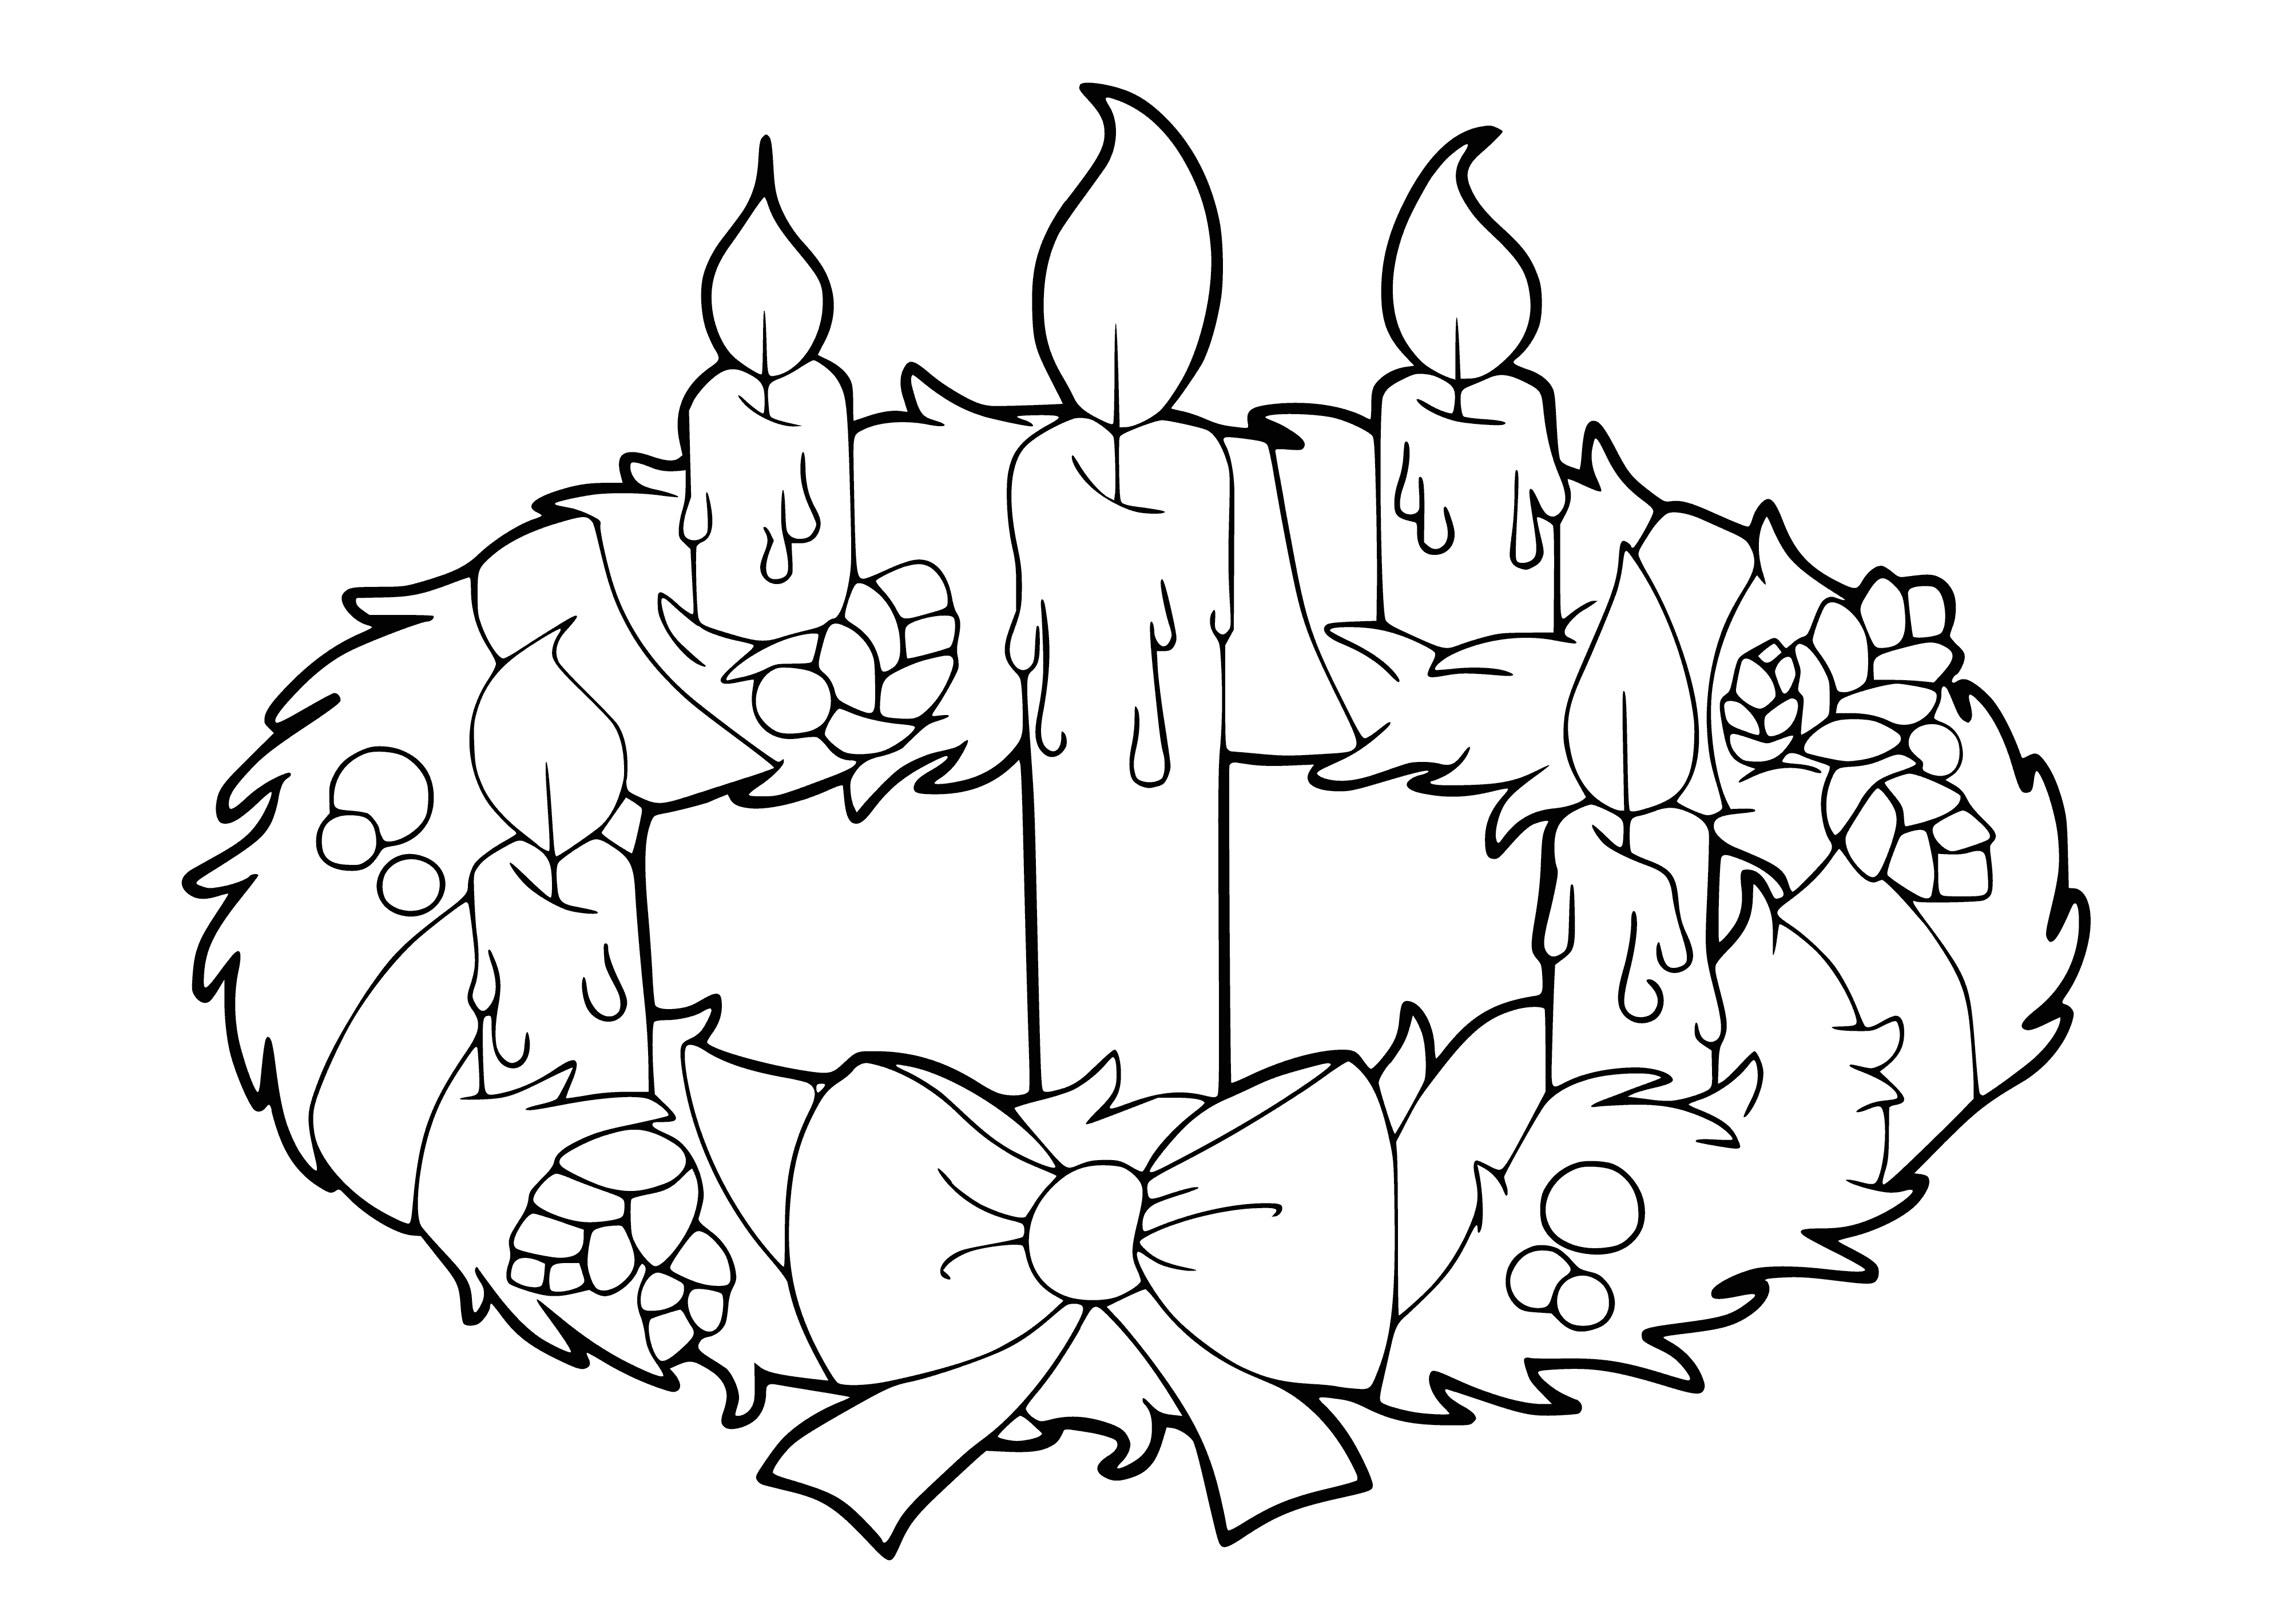 coloring page: Christmas wreath with 5 candles (2 red, 3 white), evergreen branches & red berries.